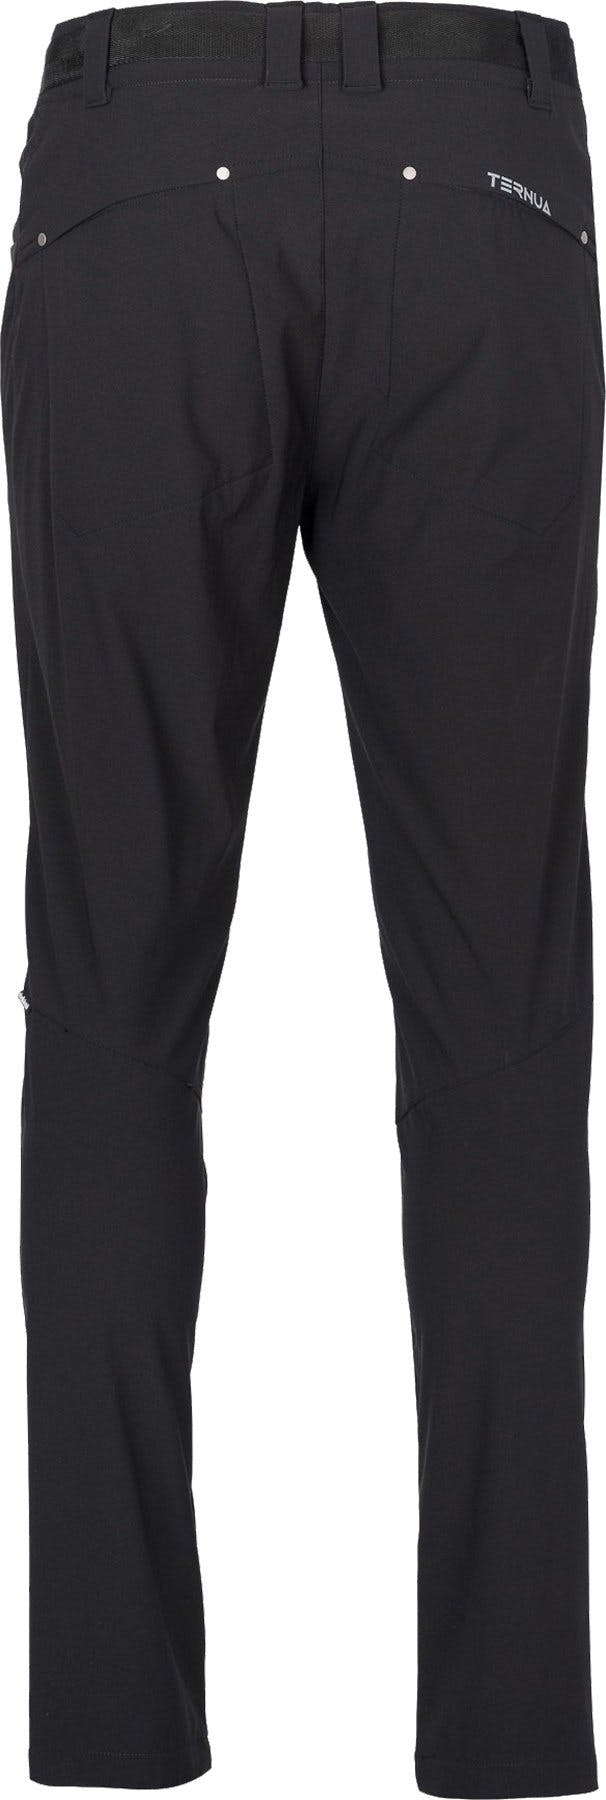 Product image for Droke Trousers - Men's